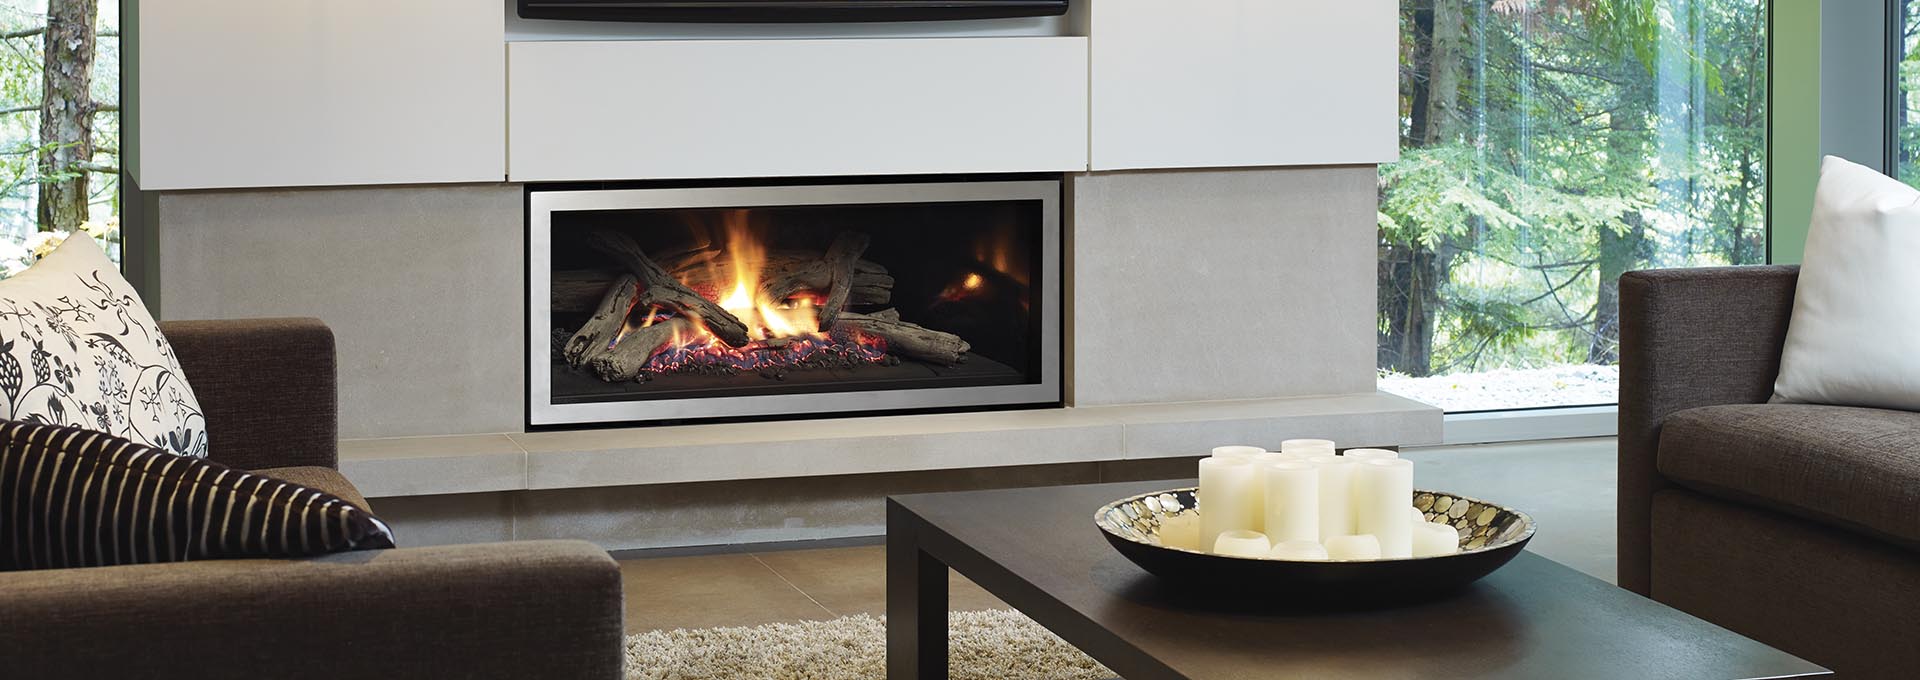 Top Tips to Get the Most Out Of Your Fire This Winter  